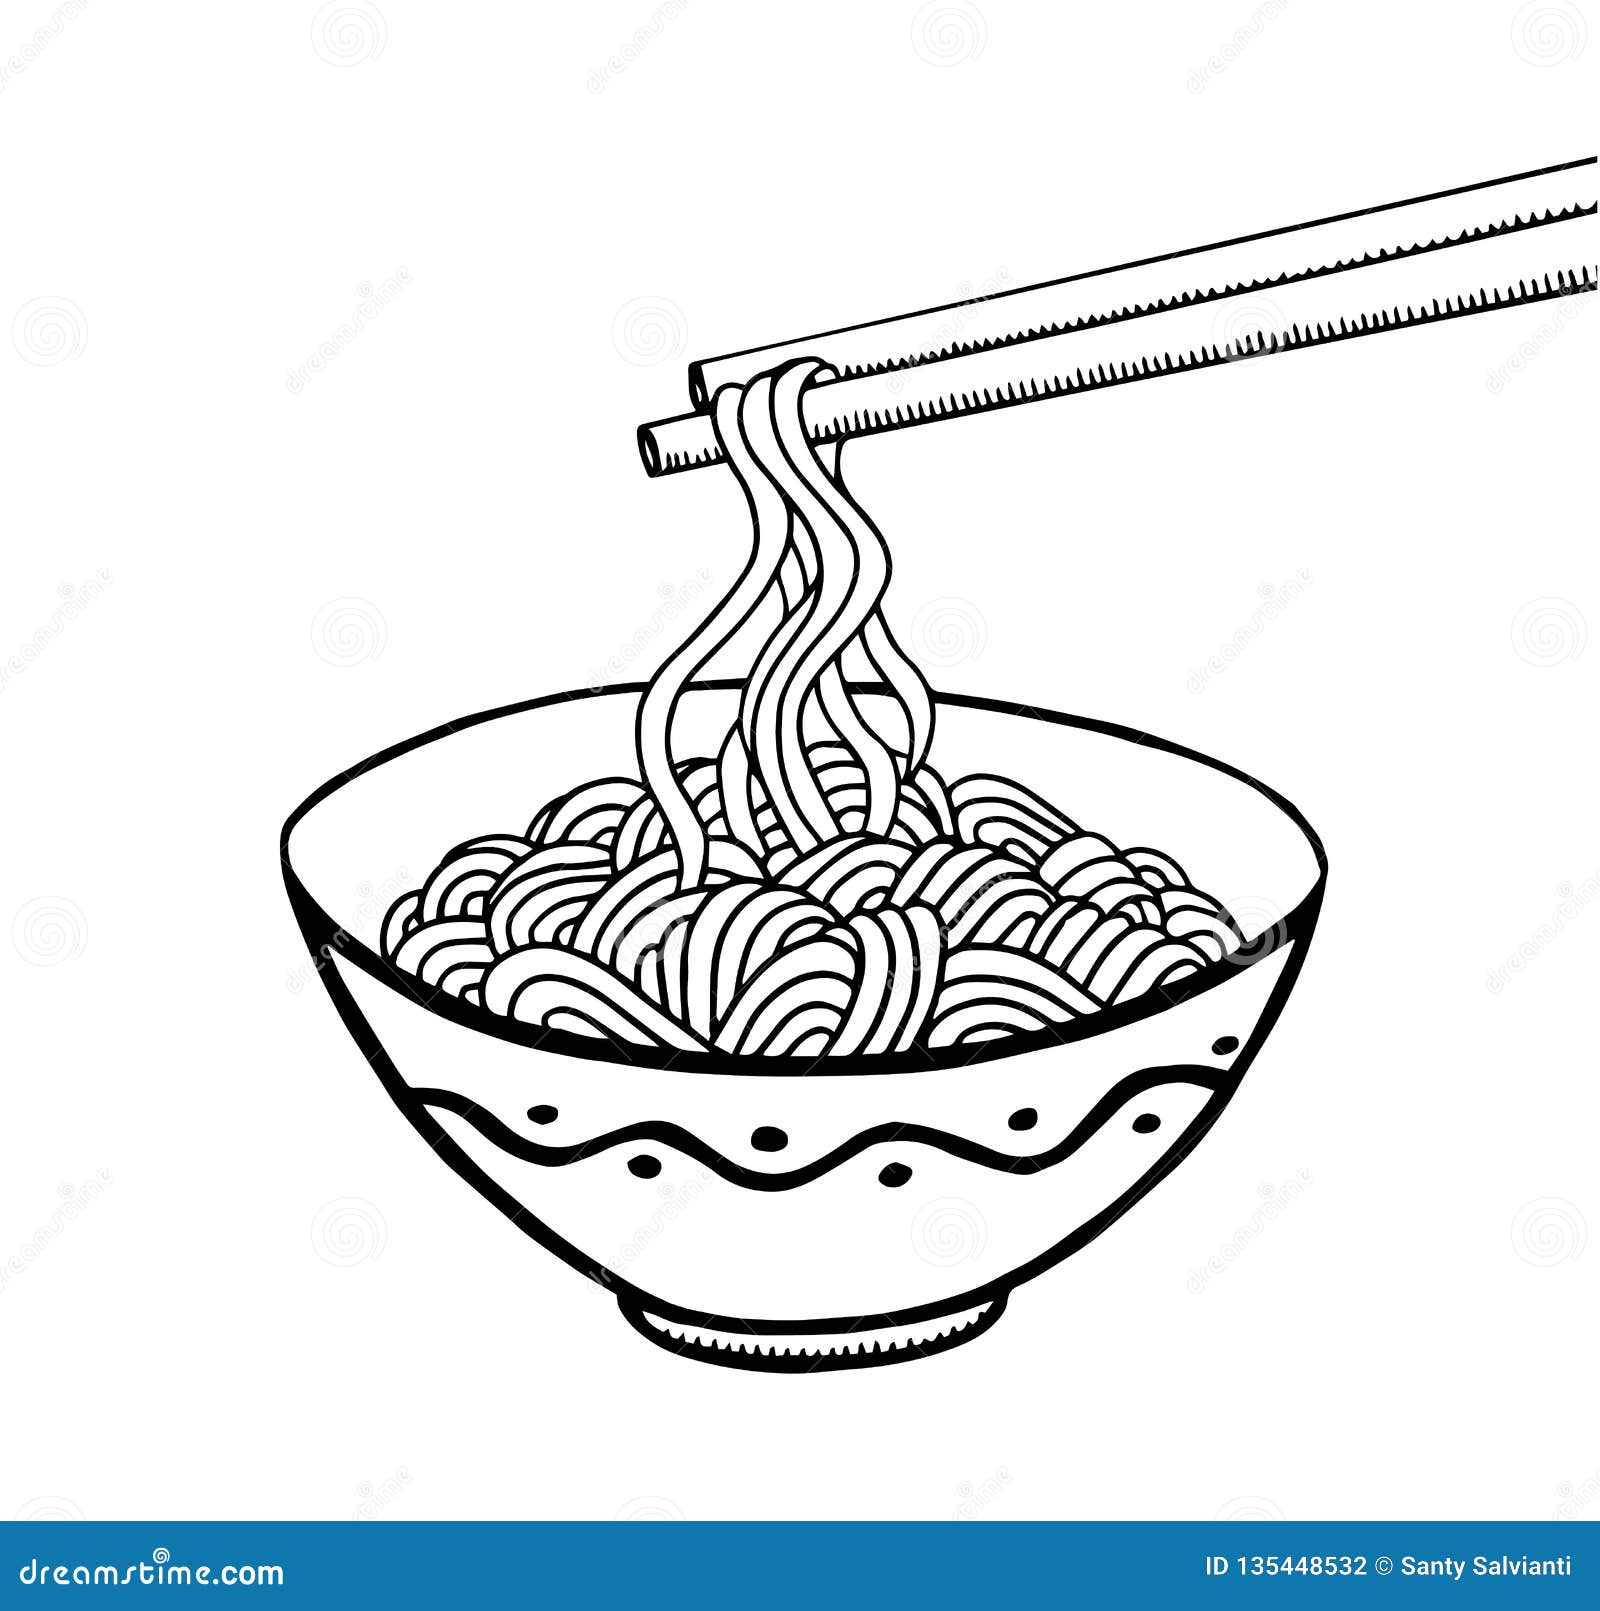 Noodles in Box and Paper Cup Drink Sketch Icon Set  Stock Illustration  92924528  PIXTA